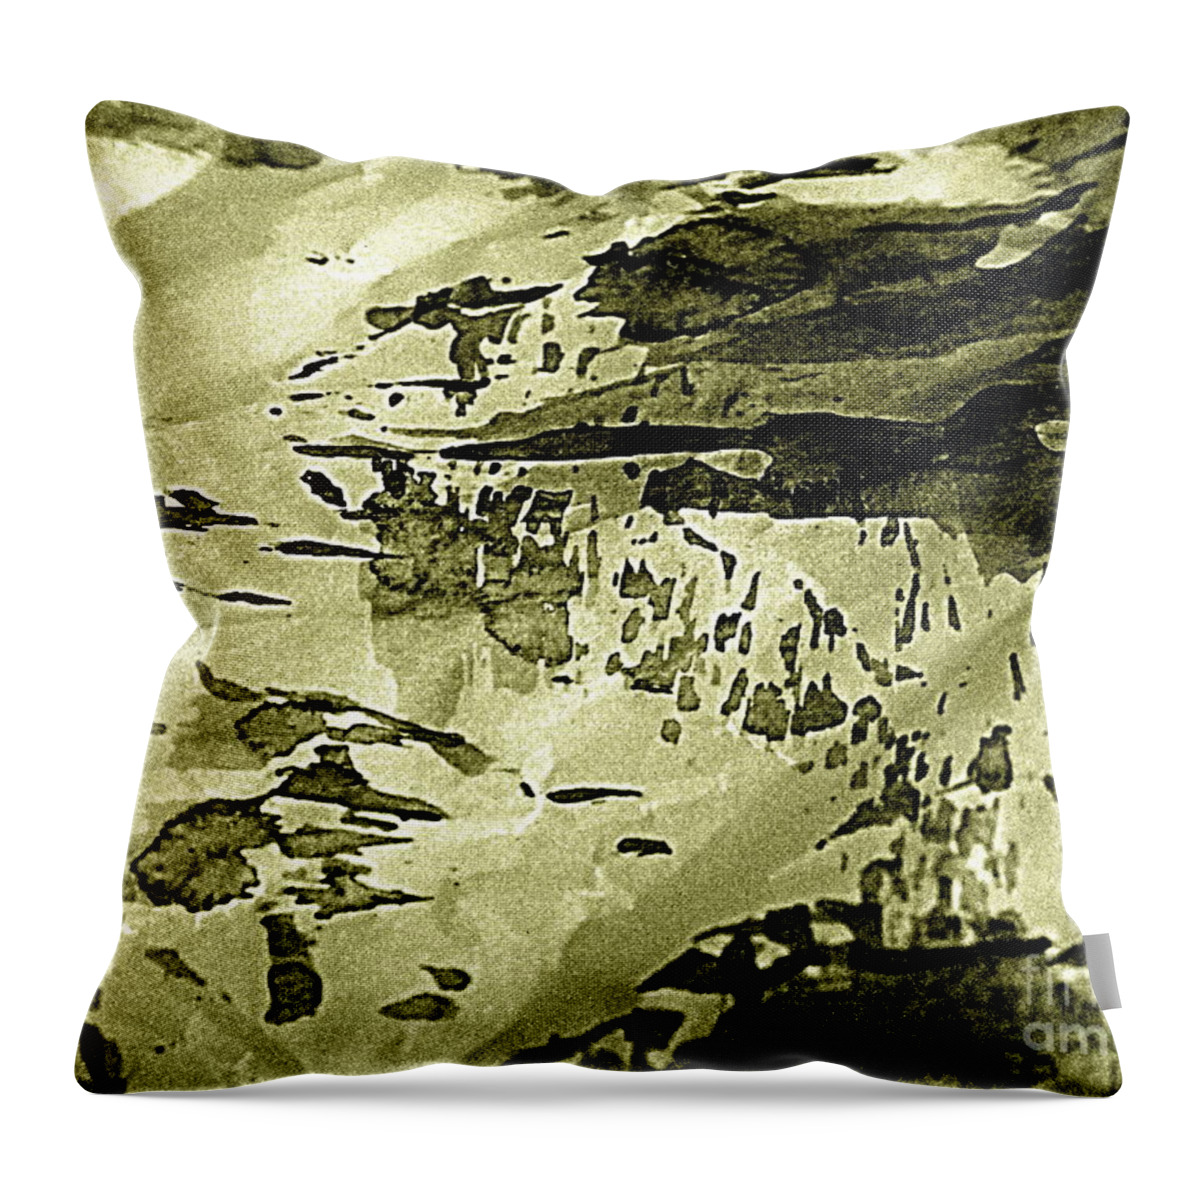 Abstract Chinese Brush Painting Throw Pillow featuring the painting Inland Waterway by Nancy Kane Chapman